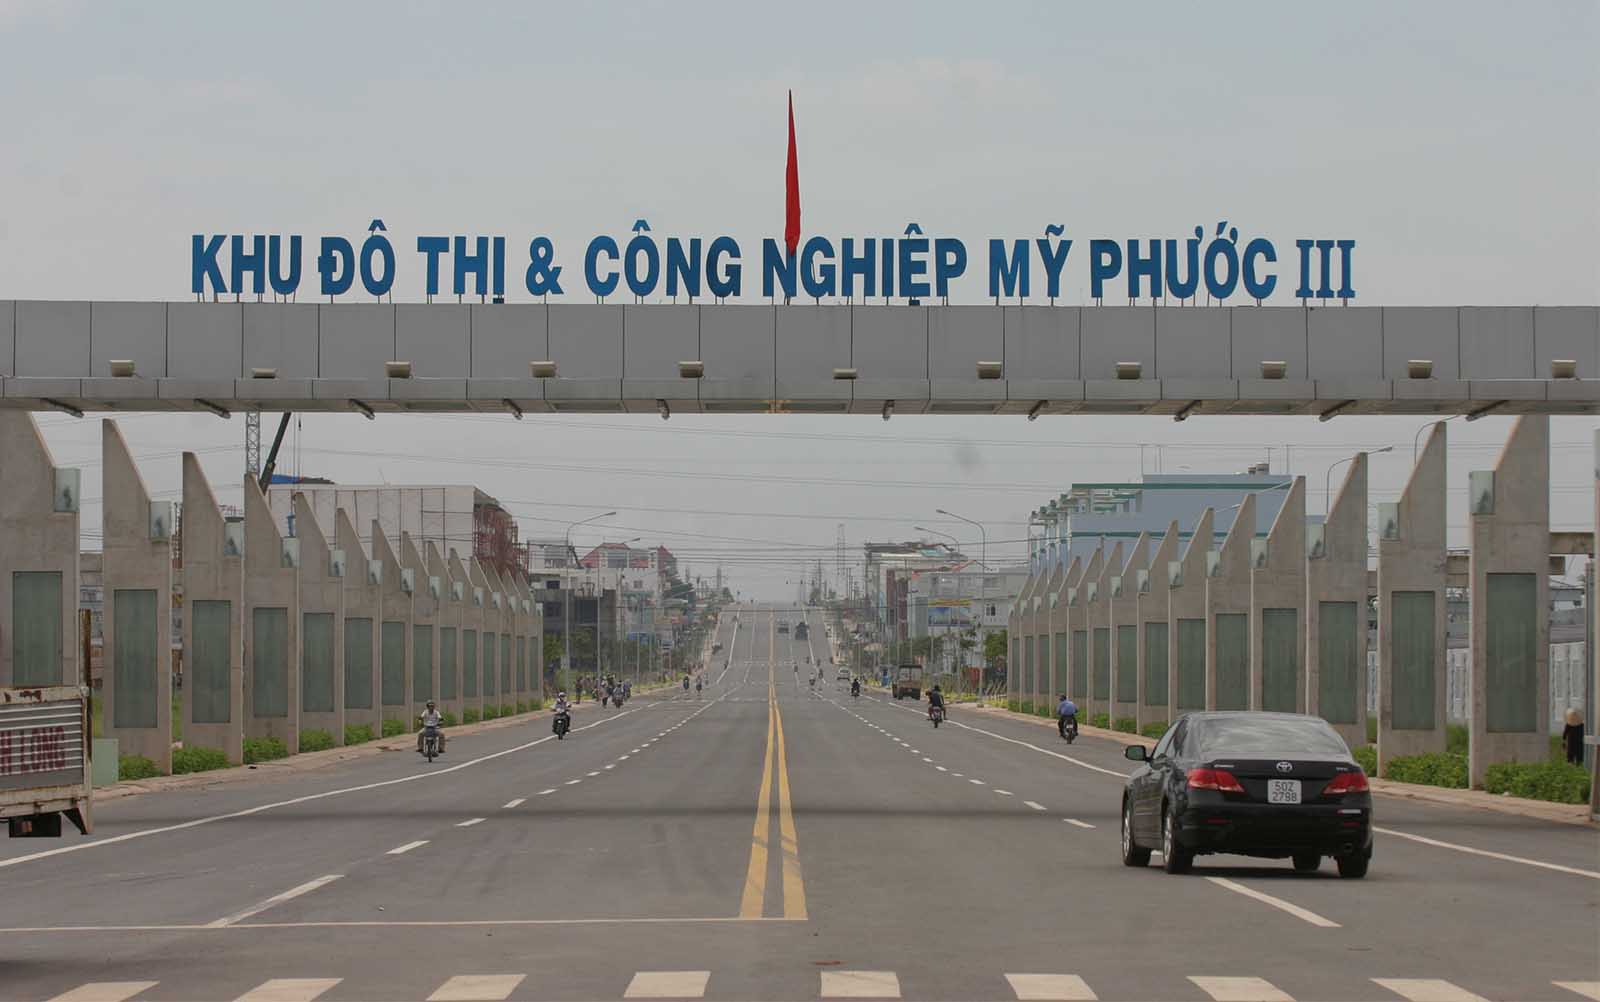 HV thicong myphuoc3a